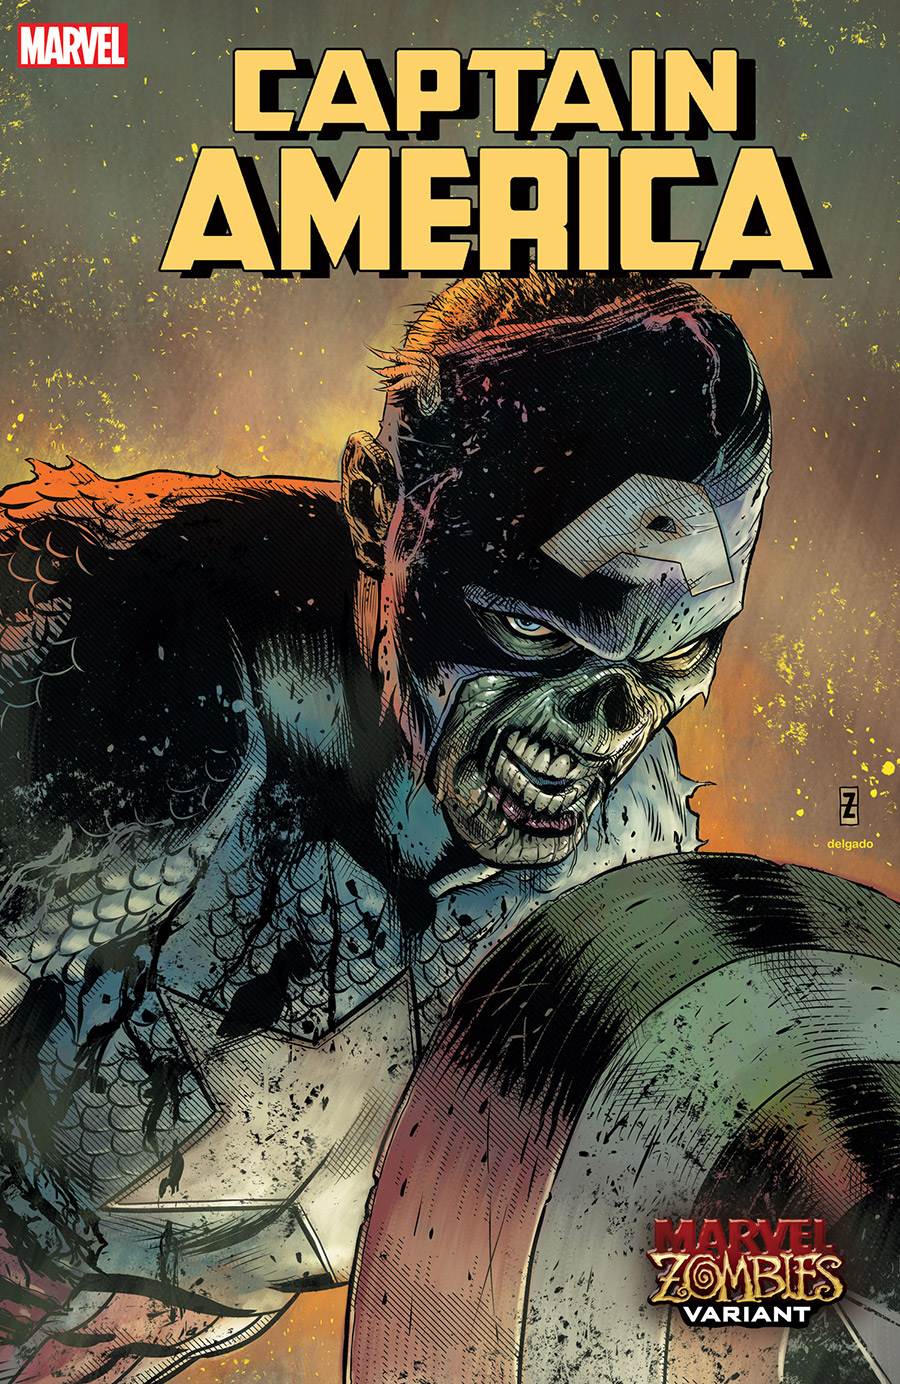 CAPTAIN AMERICA 21 MARVEL ZOMBIES VARIANT by PATCH ZIRCHER